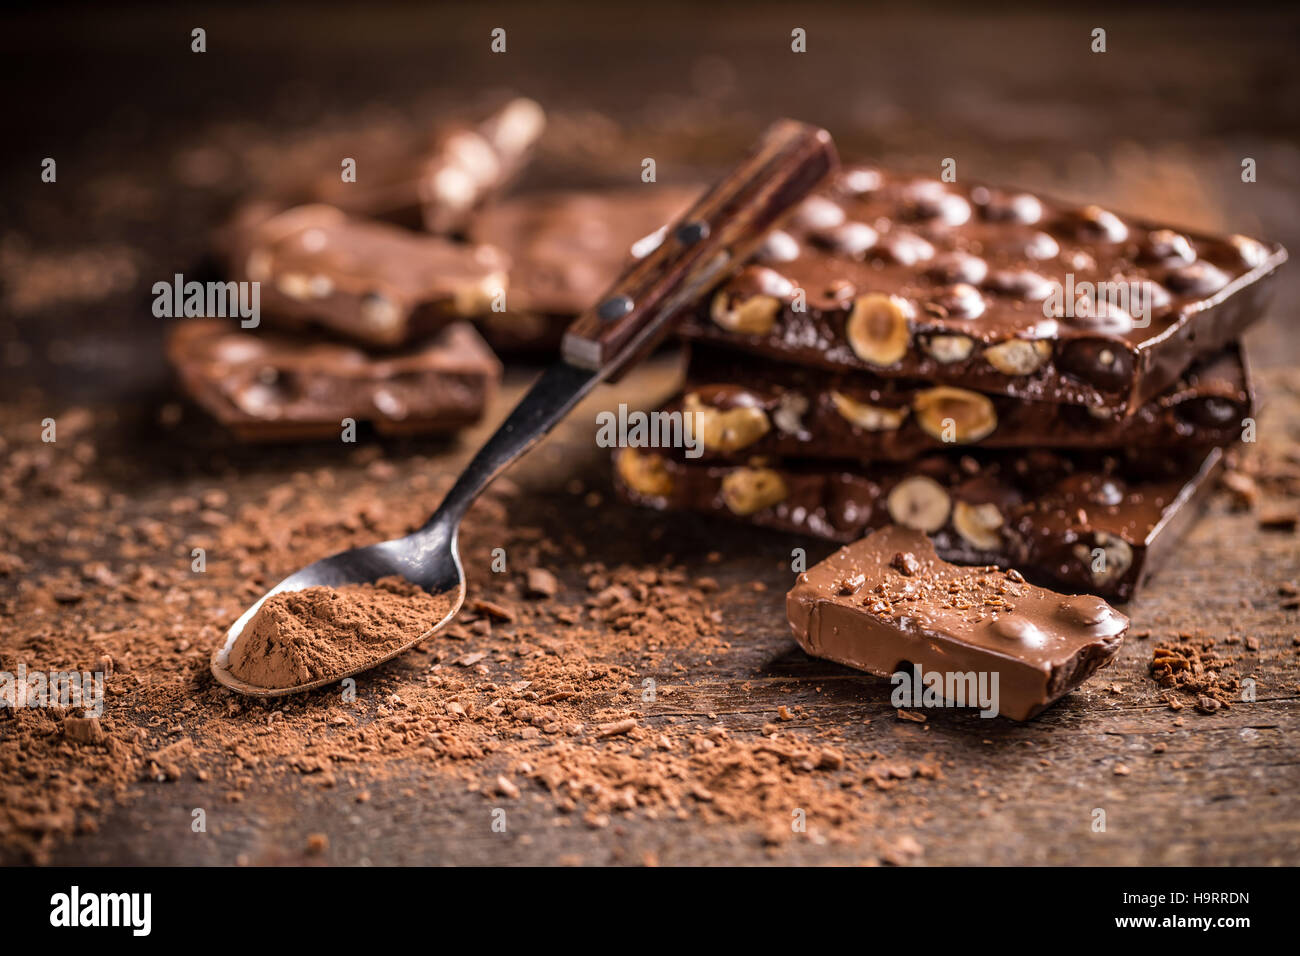 Chocolate with nuts Stock Photo